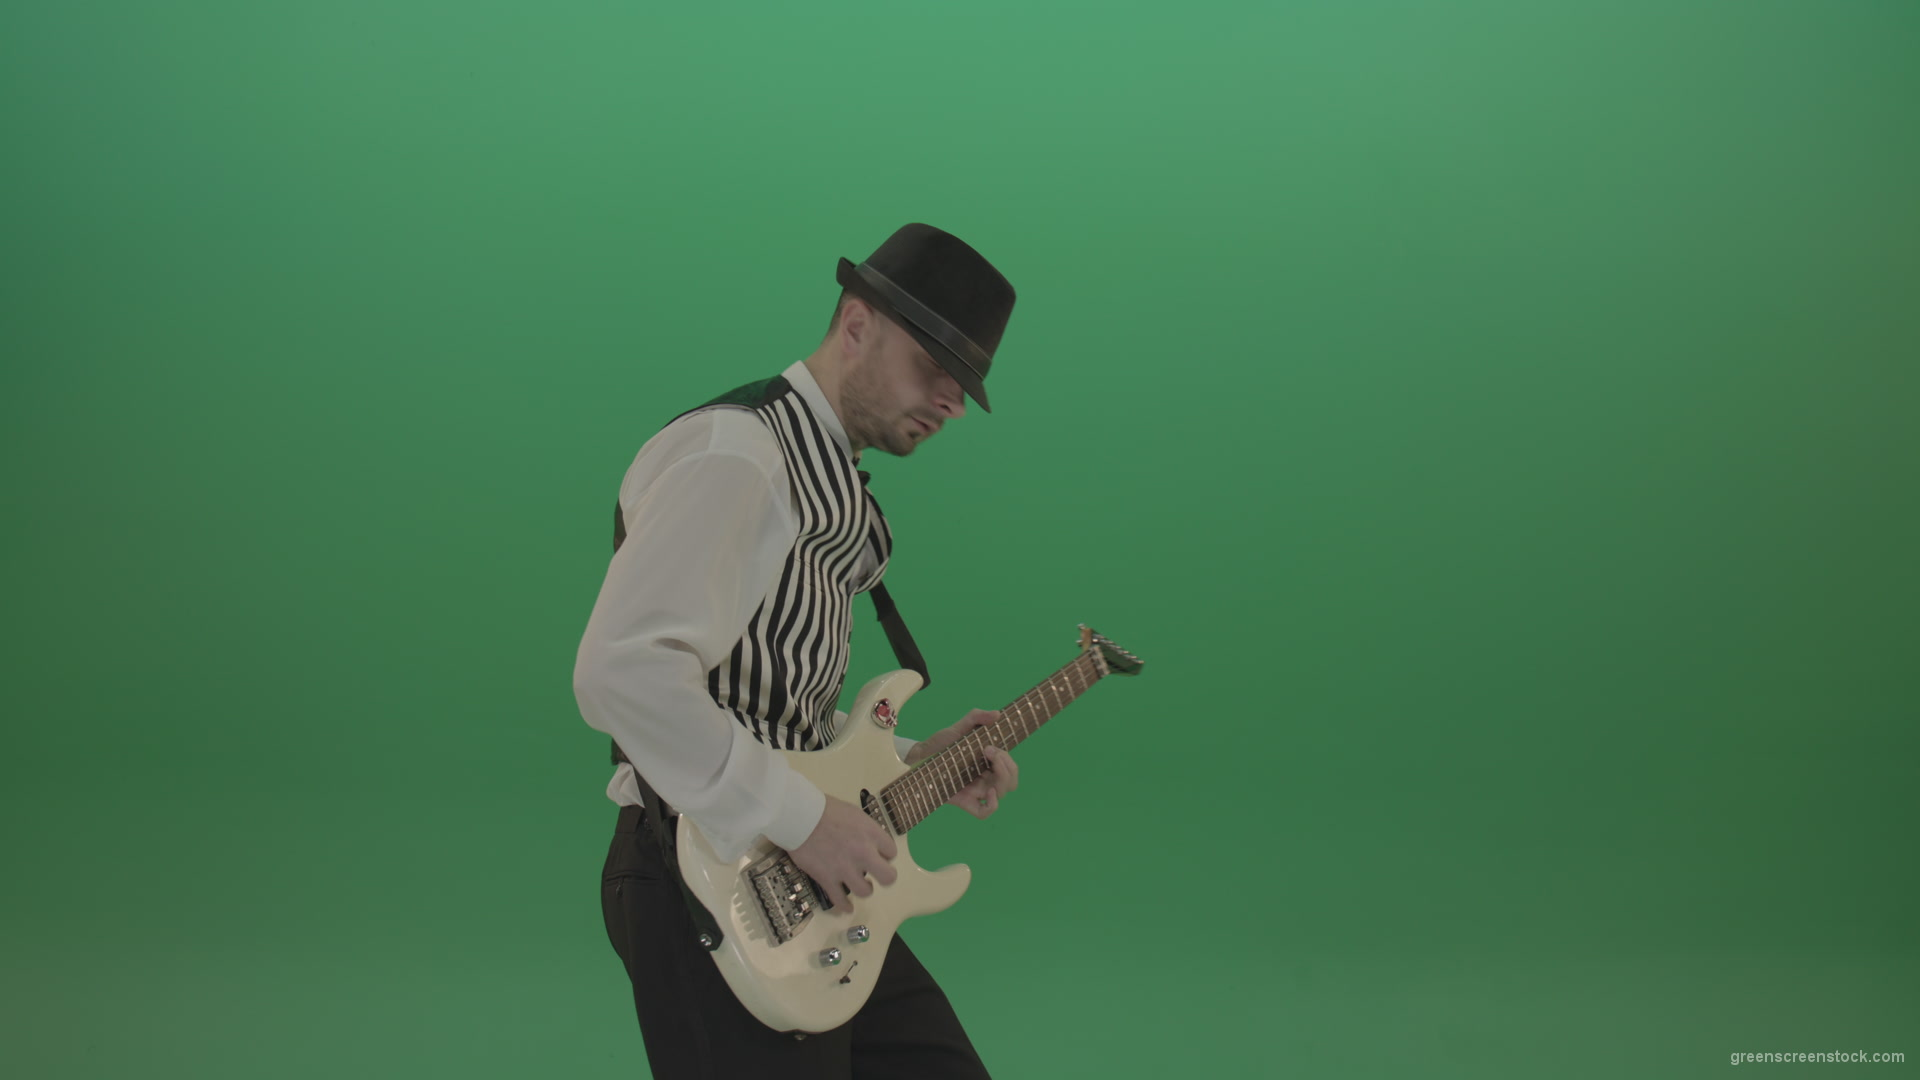 Classic-jazz-guitarist-play-white-electro-guitar-solo-music-on-green-screen_008 Green Screen Stock